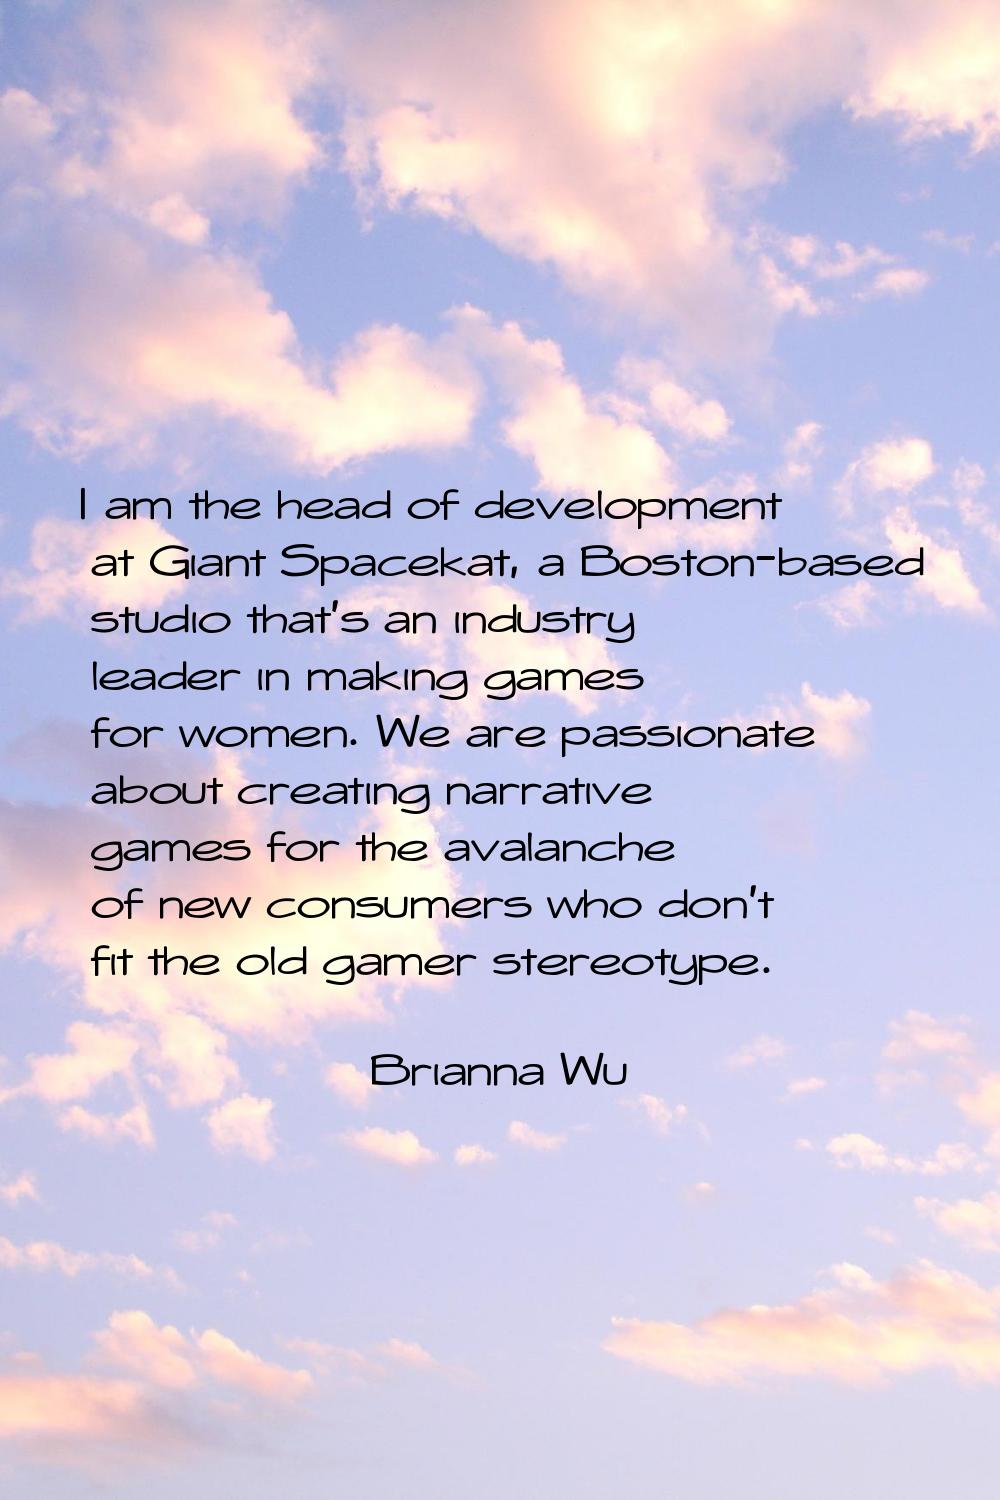 I am the head of development at Giant Spacekat, a Boston-based studio that's an industry leader in 